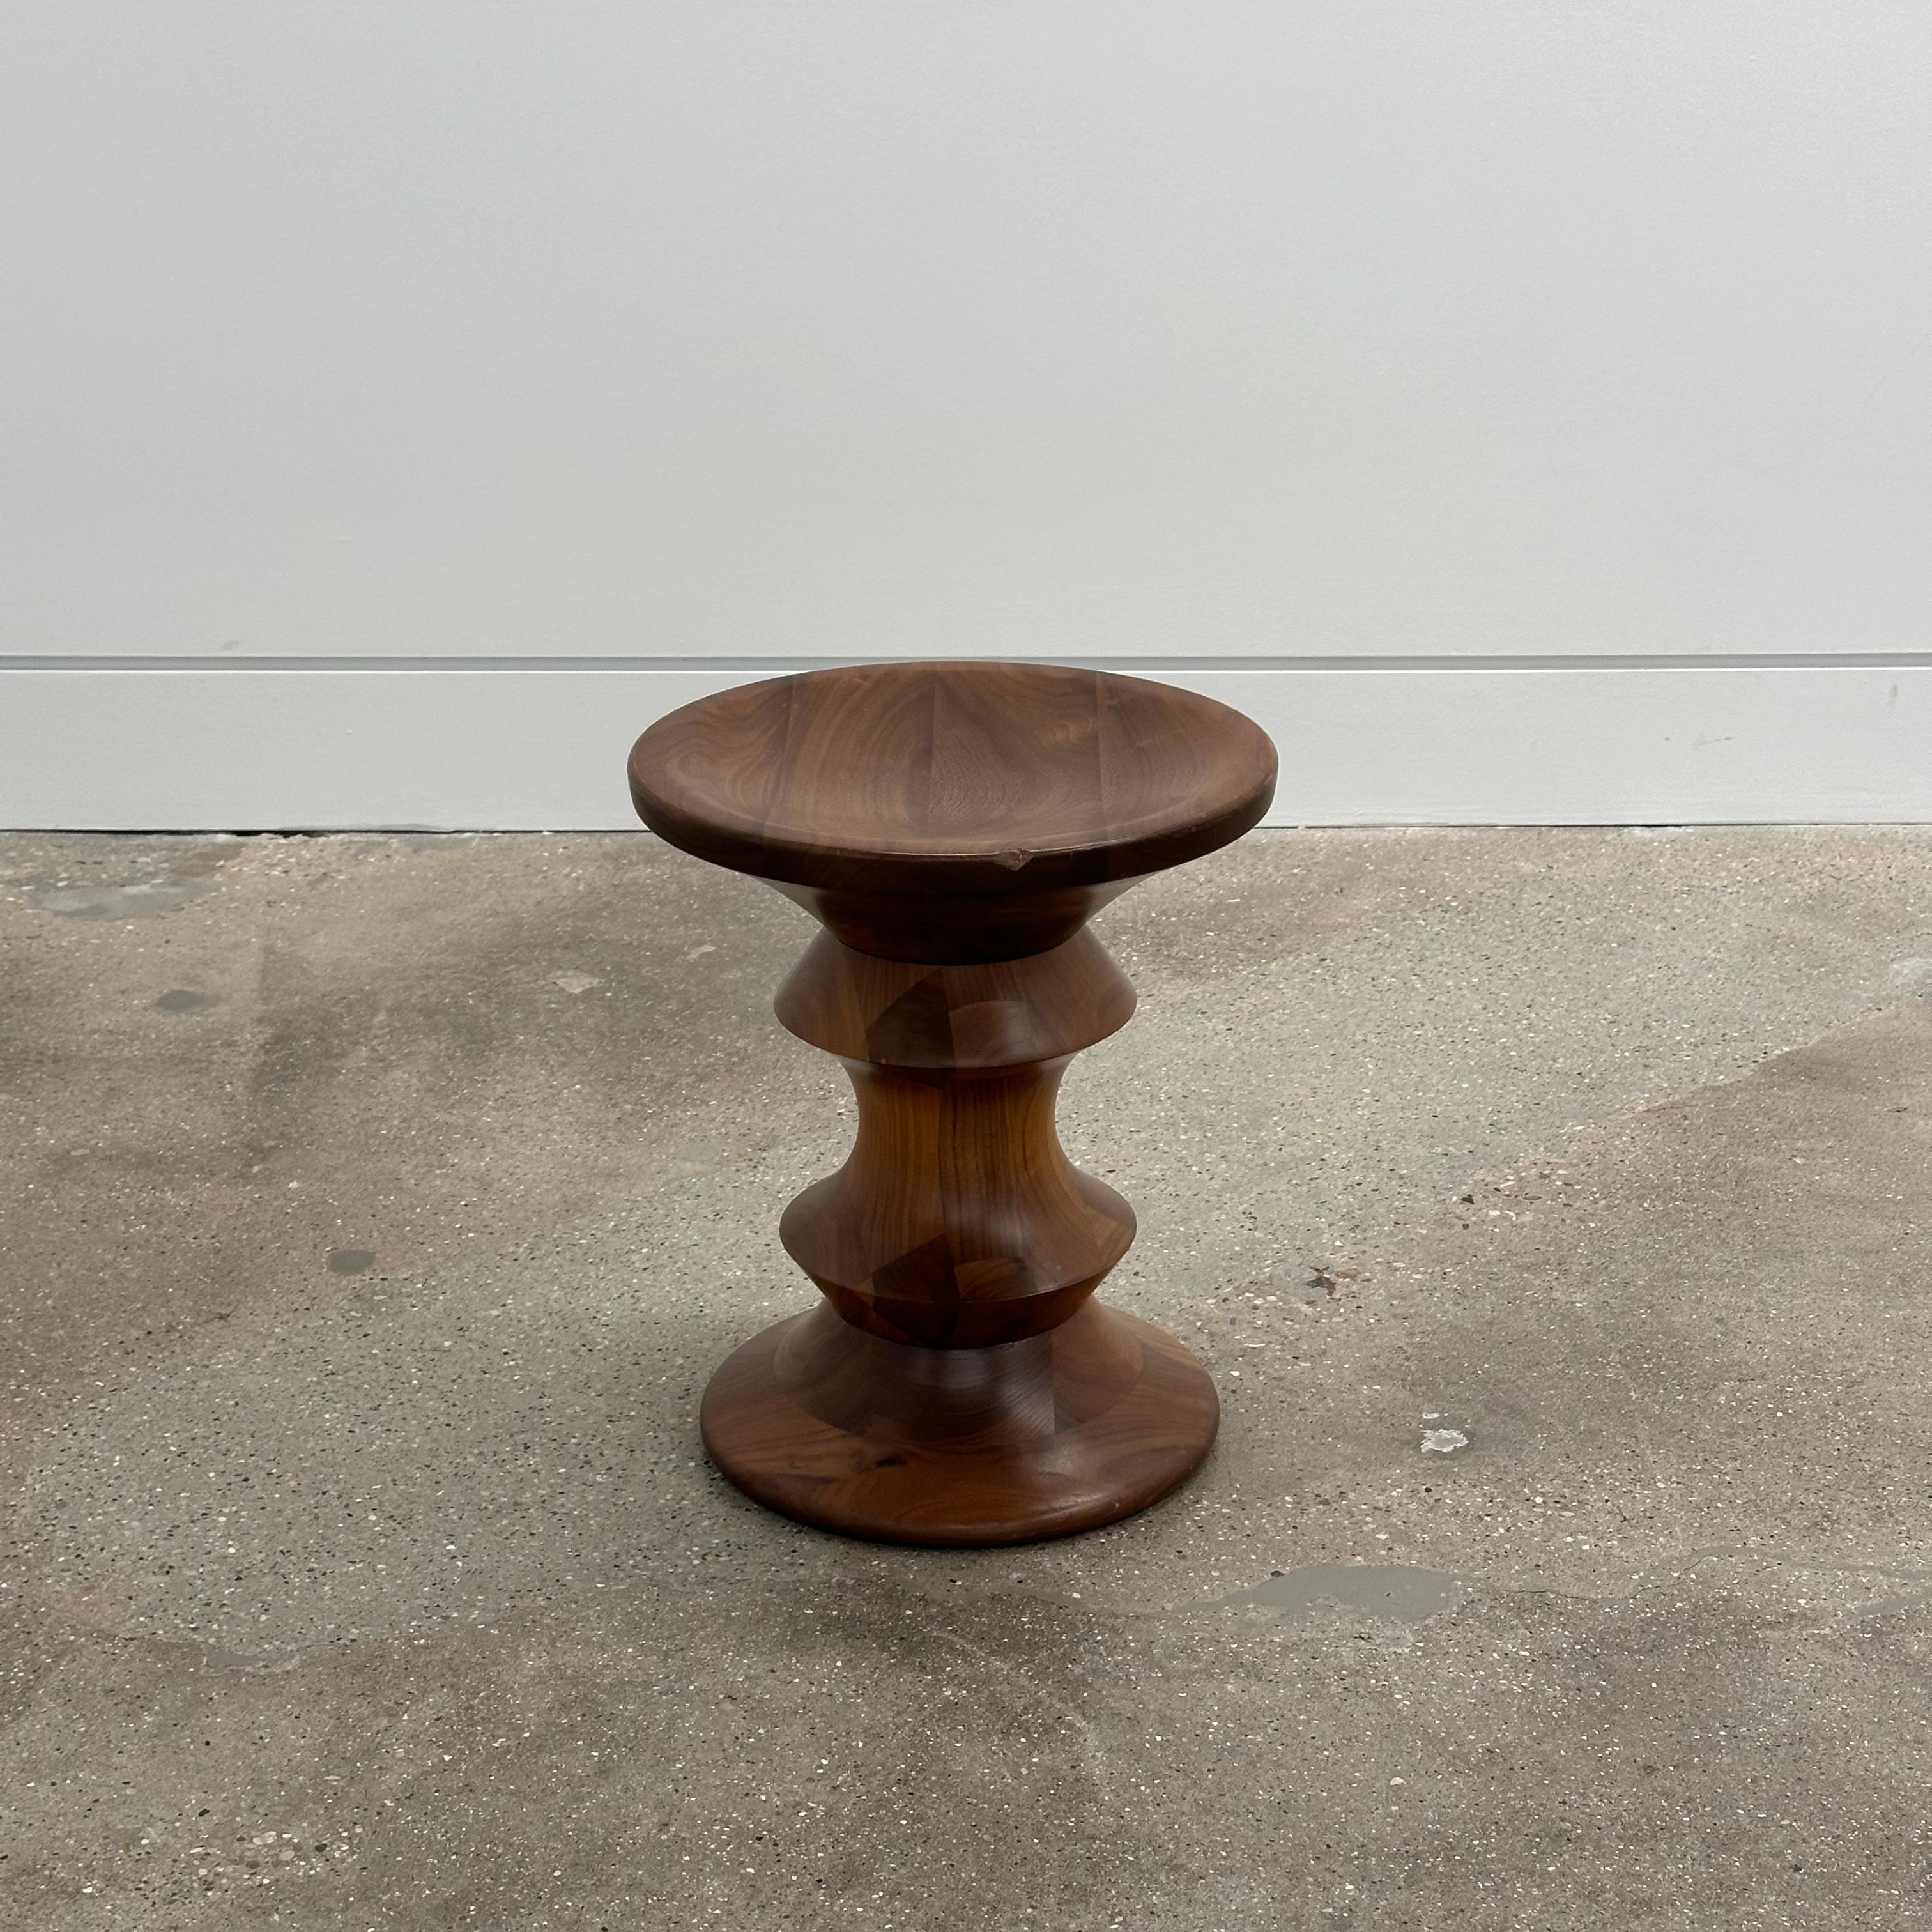 Charles and Ray Eames for Herman Miller Walnut Time Life Stool, United States. A fine lathe-turned wood stool designed by Charles and Ray Eames for Herman Miller, USA. Another one is also available, see other listing.